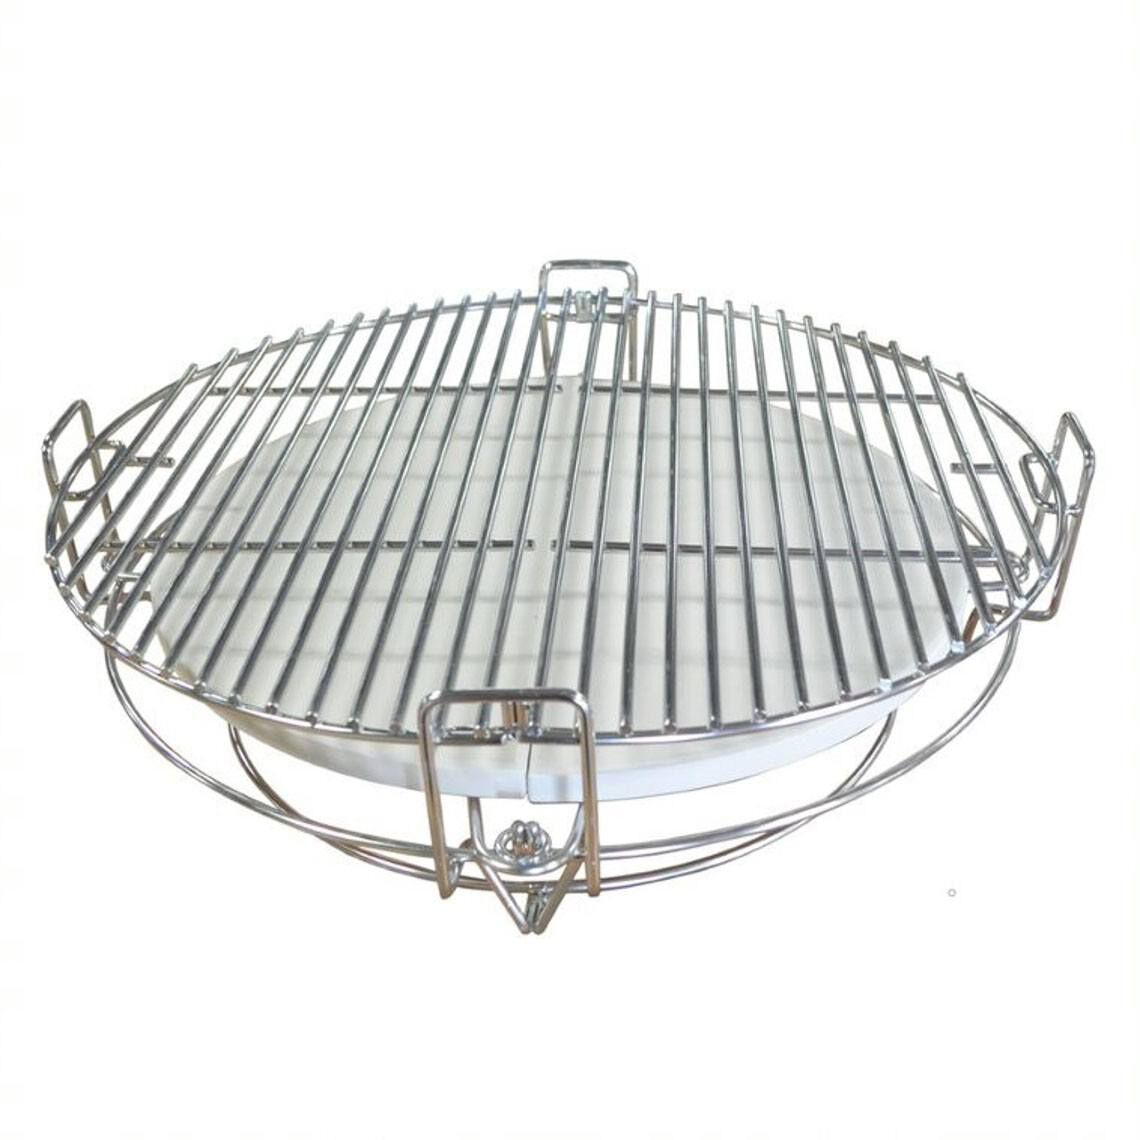 Multi-Level Cooking System Fits 15" Grill - Fits Grill Size: 18" | 18" - view 2